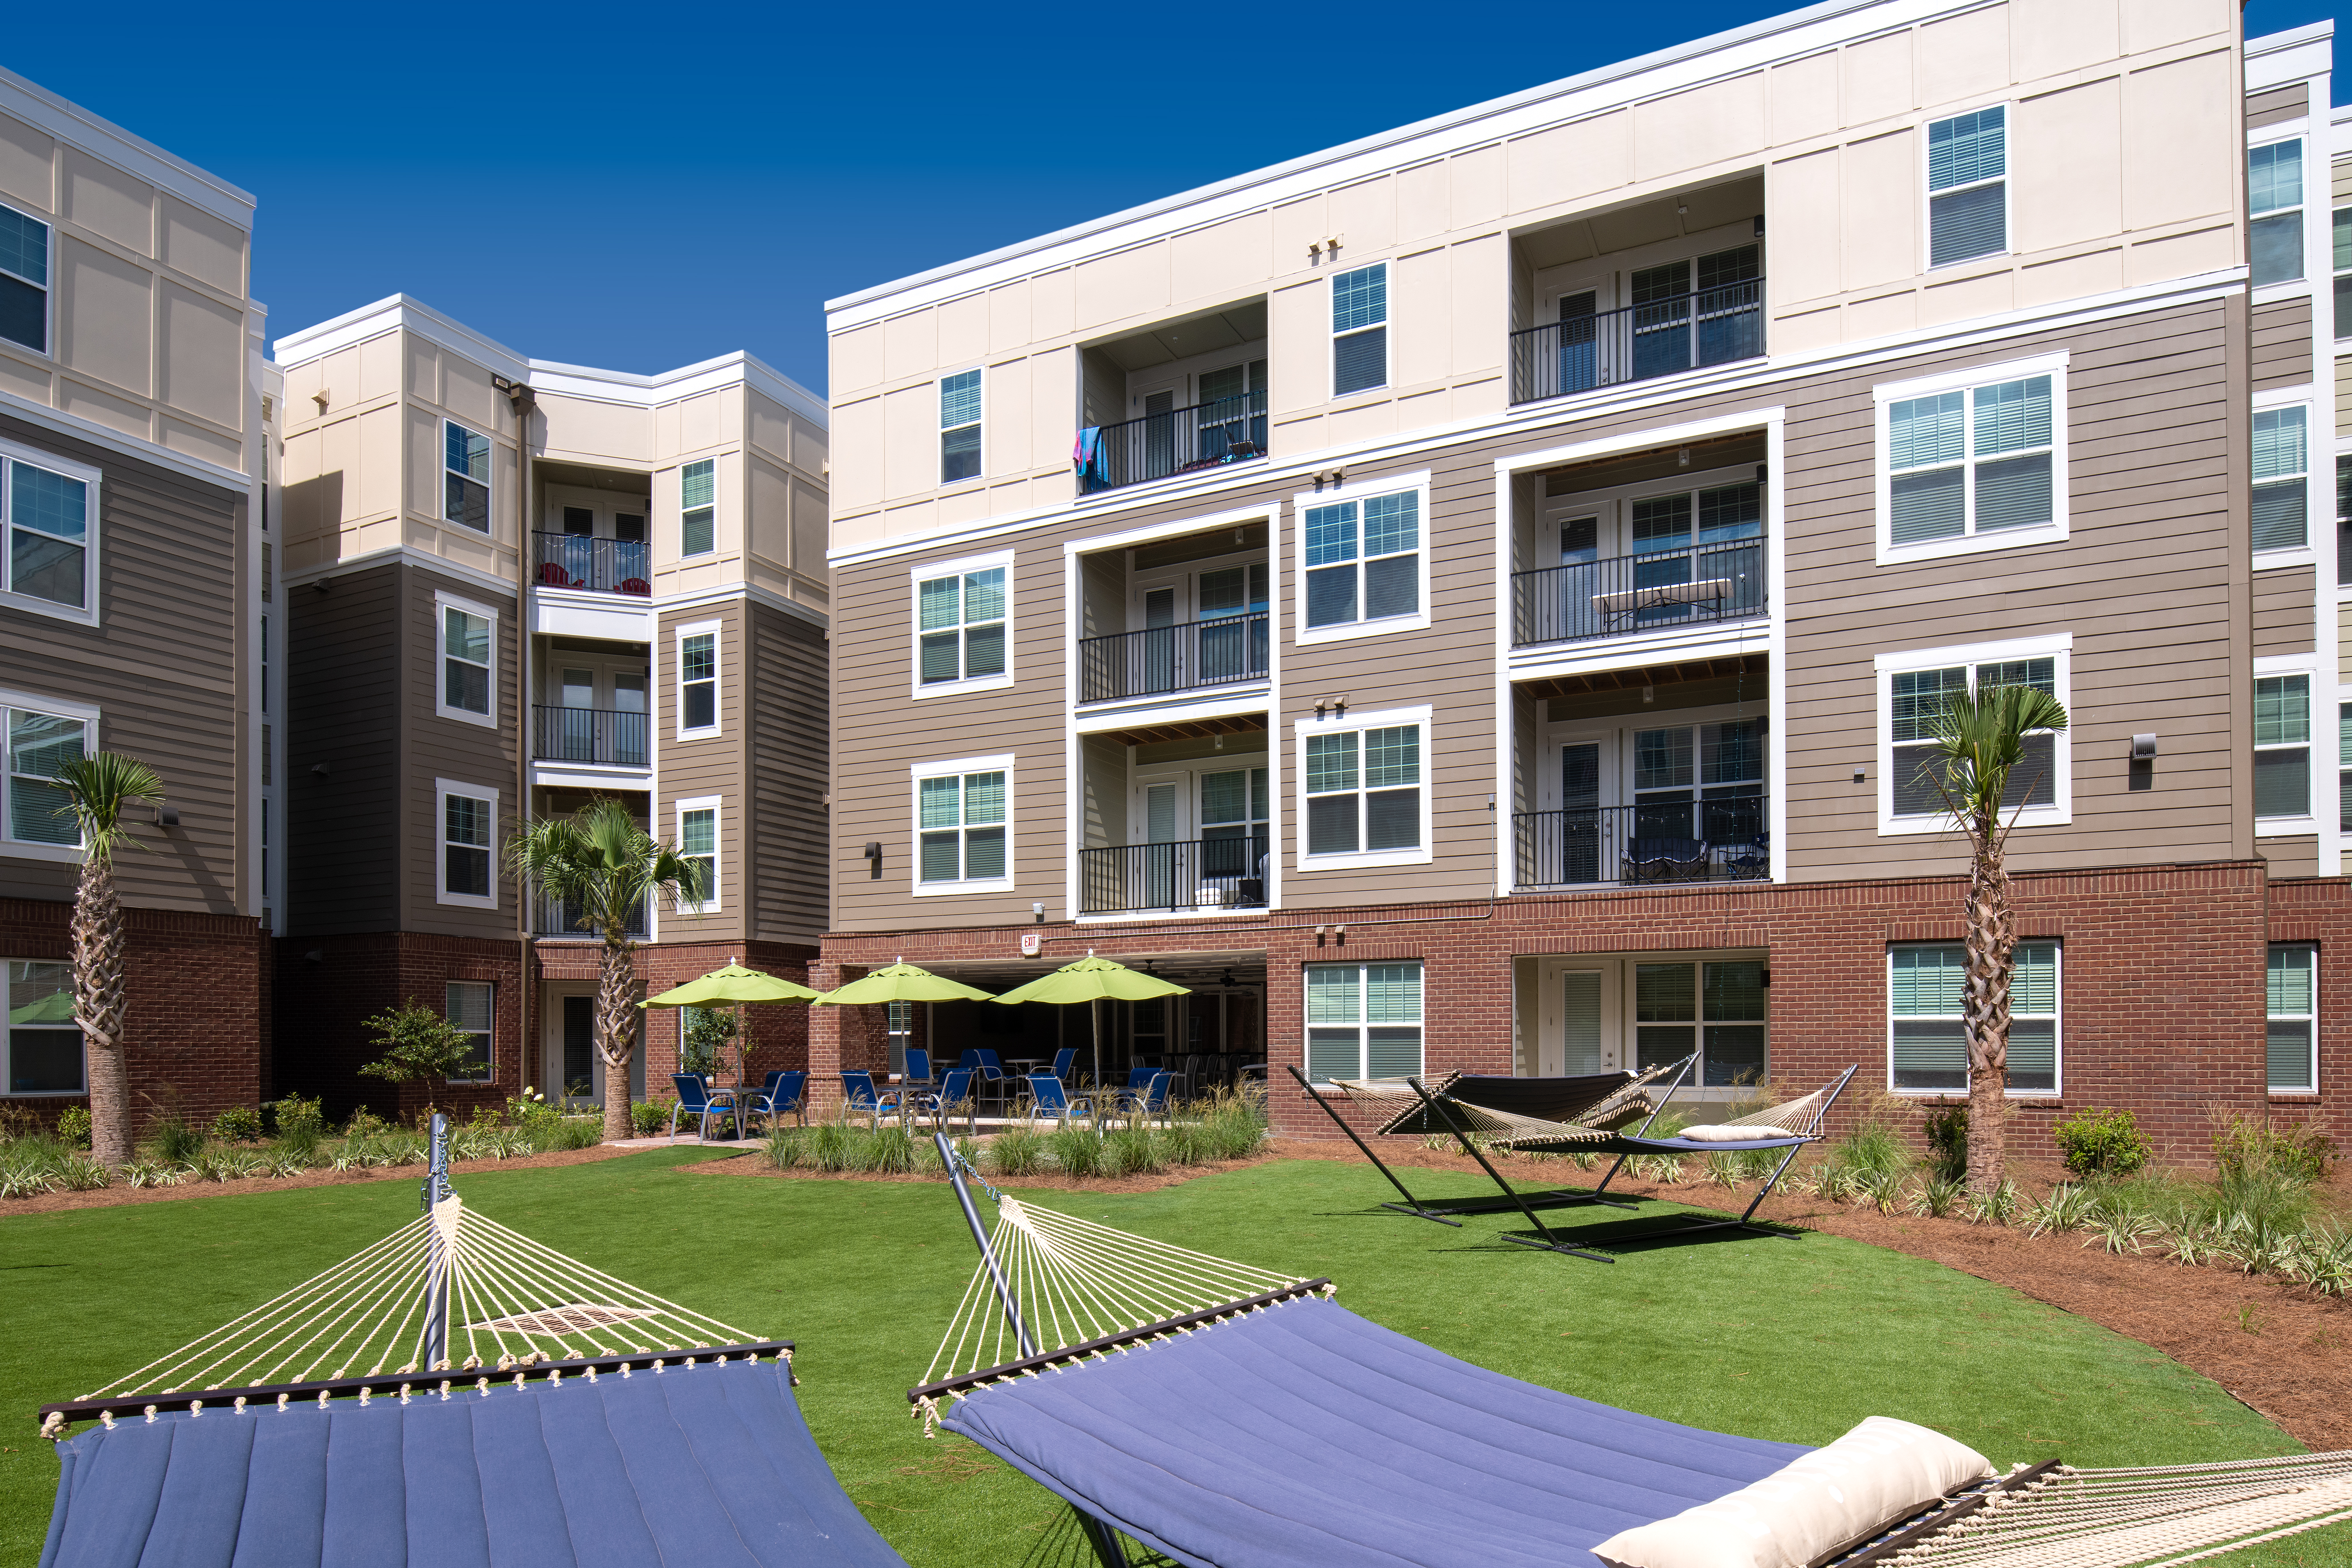 quantum on west call off campus apartments near fsu tallahassee florida courtyard hammocks and patio lounge spaces